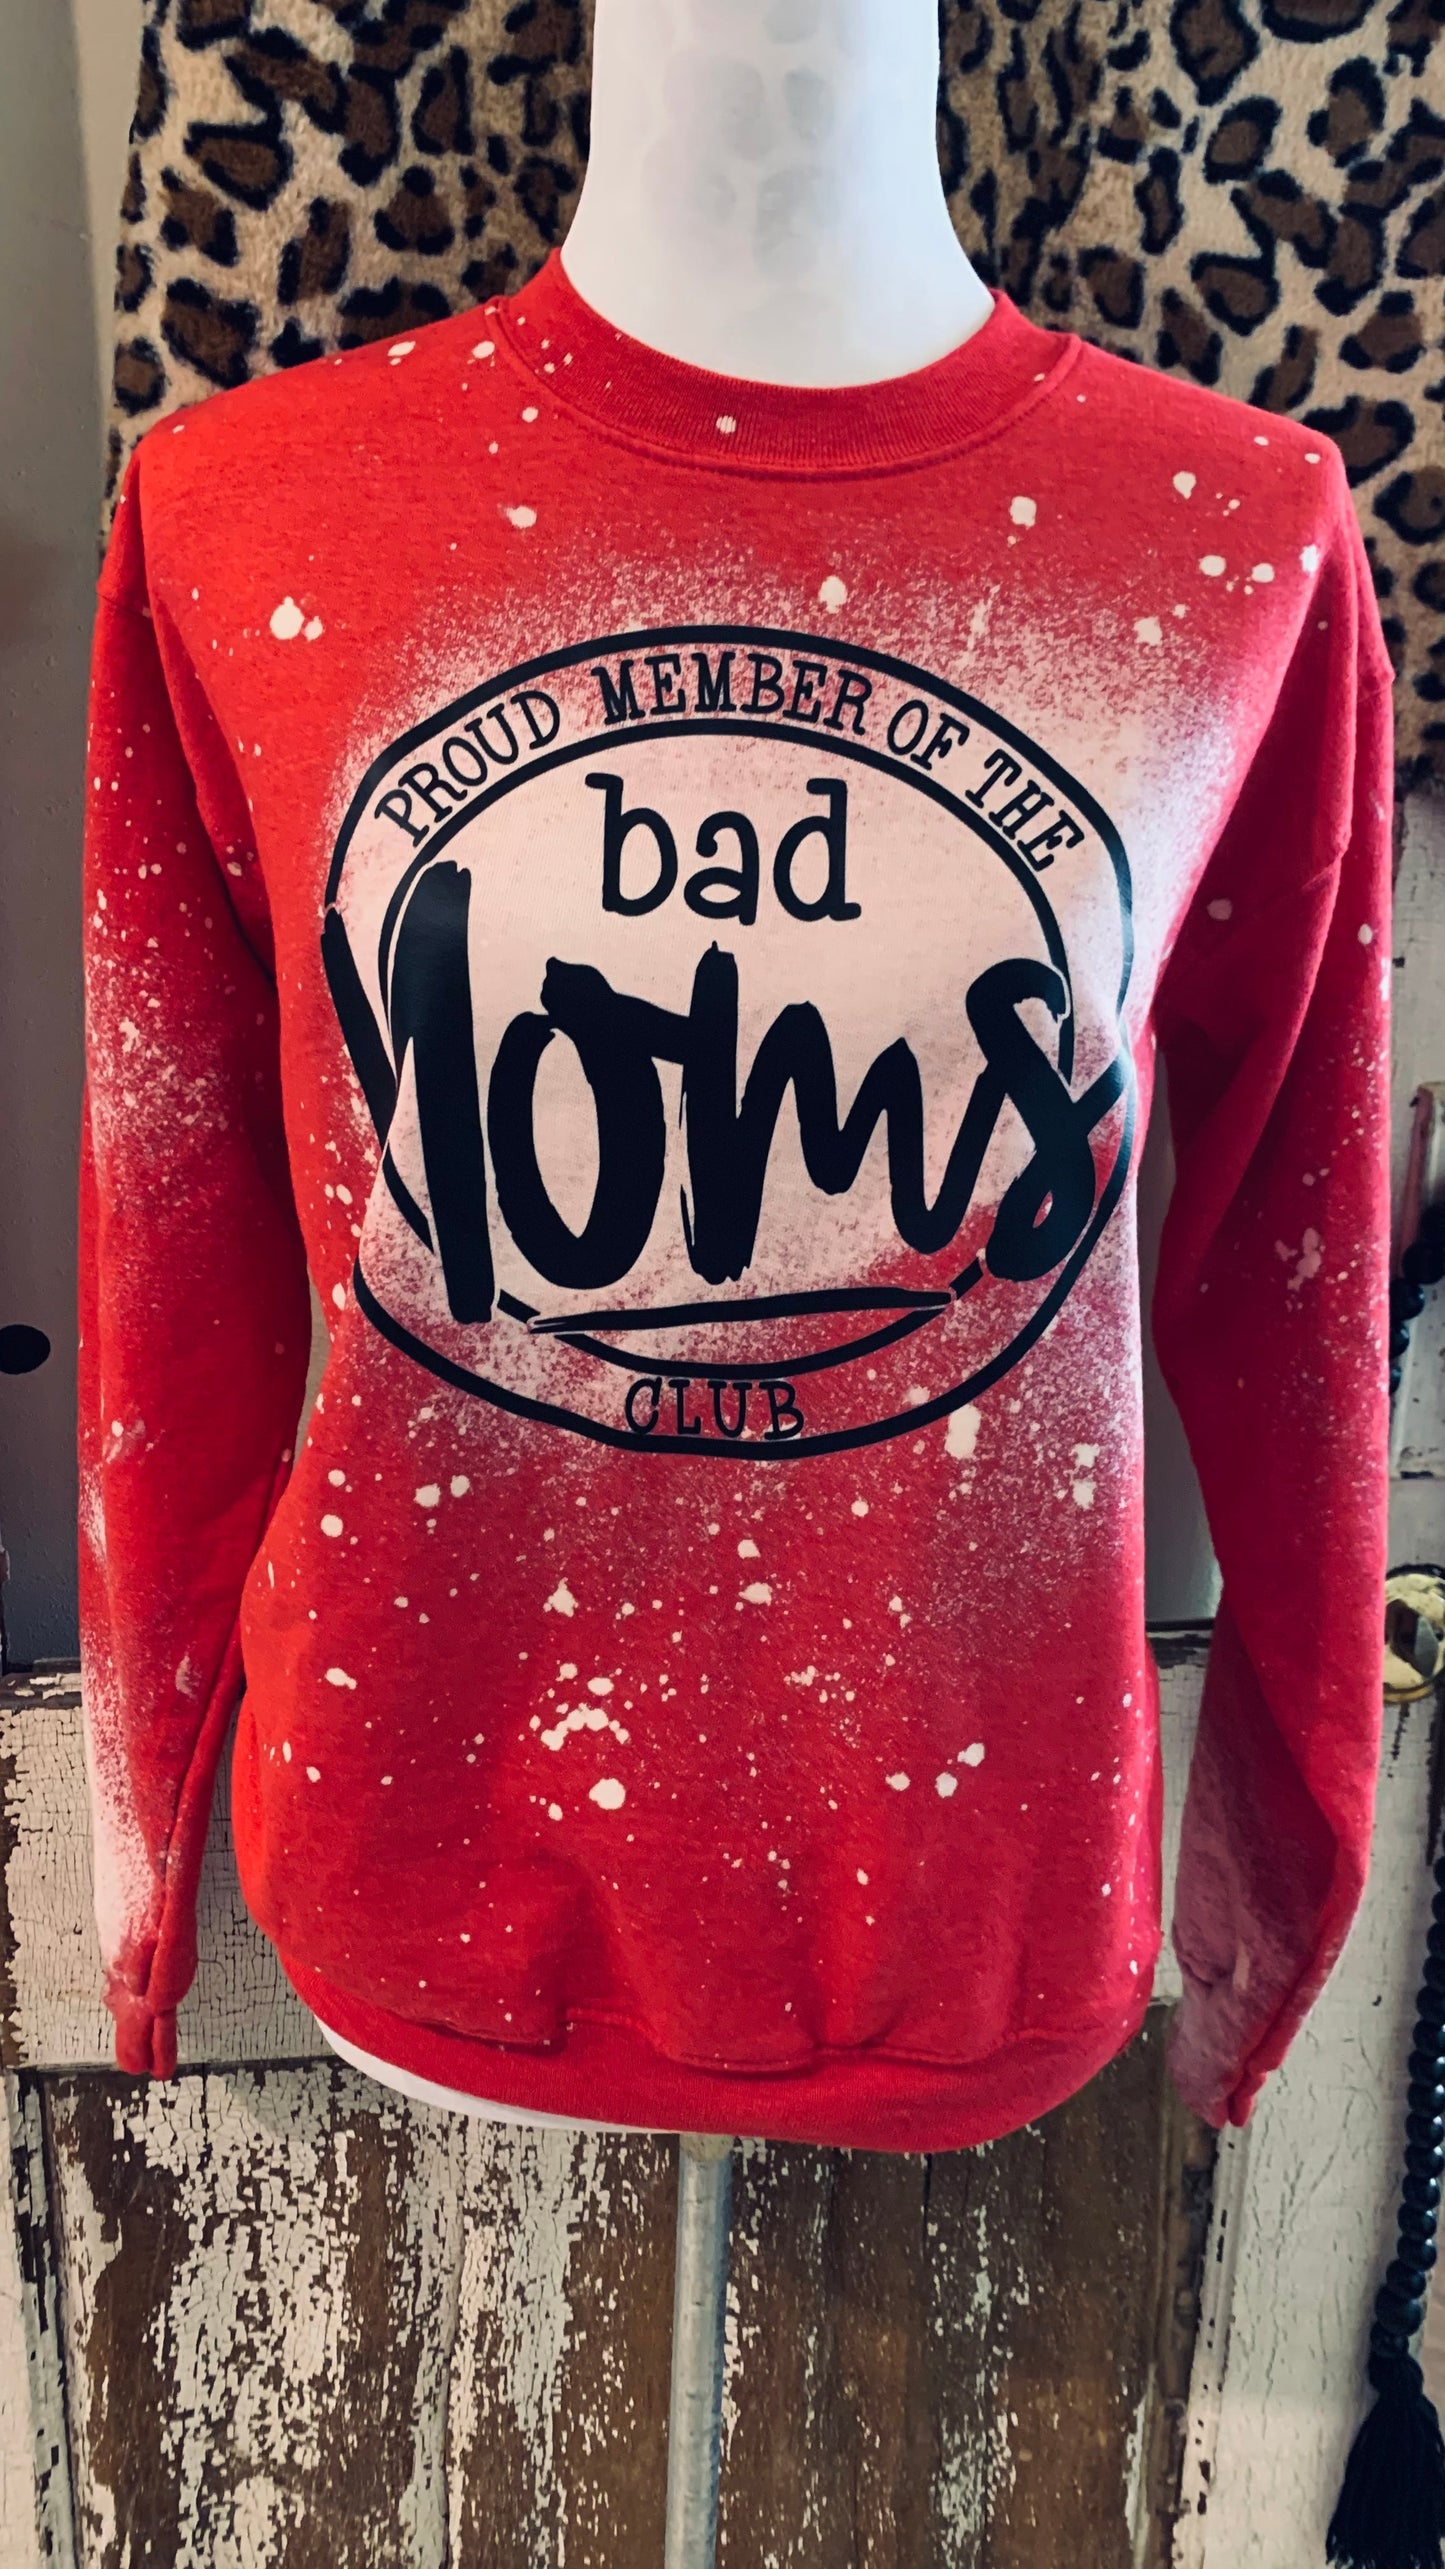 Proud member of the Bad Moms Club - other colors available